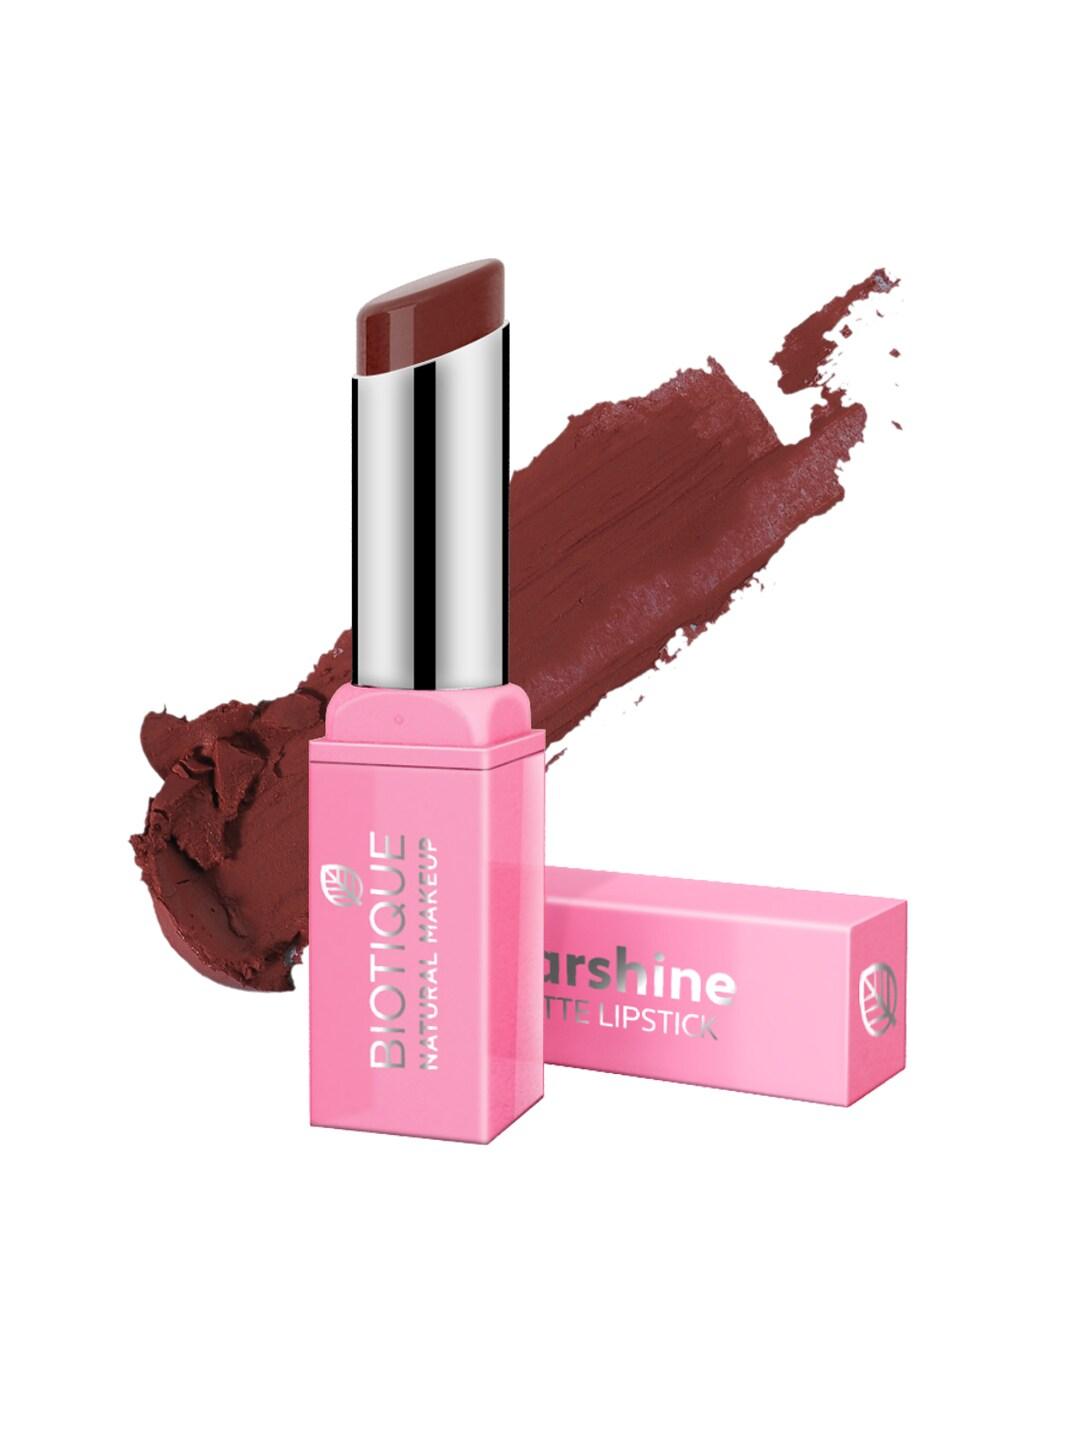 BIOTIQUE NATURAL MAKEUP Starshine In Love With Coco Matte Lipstick B305